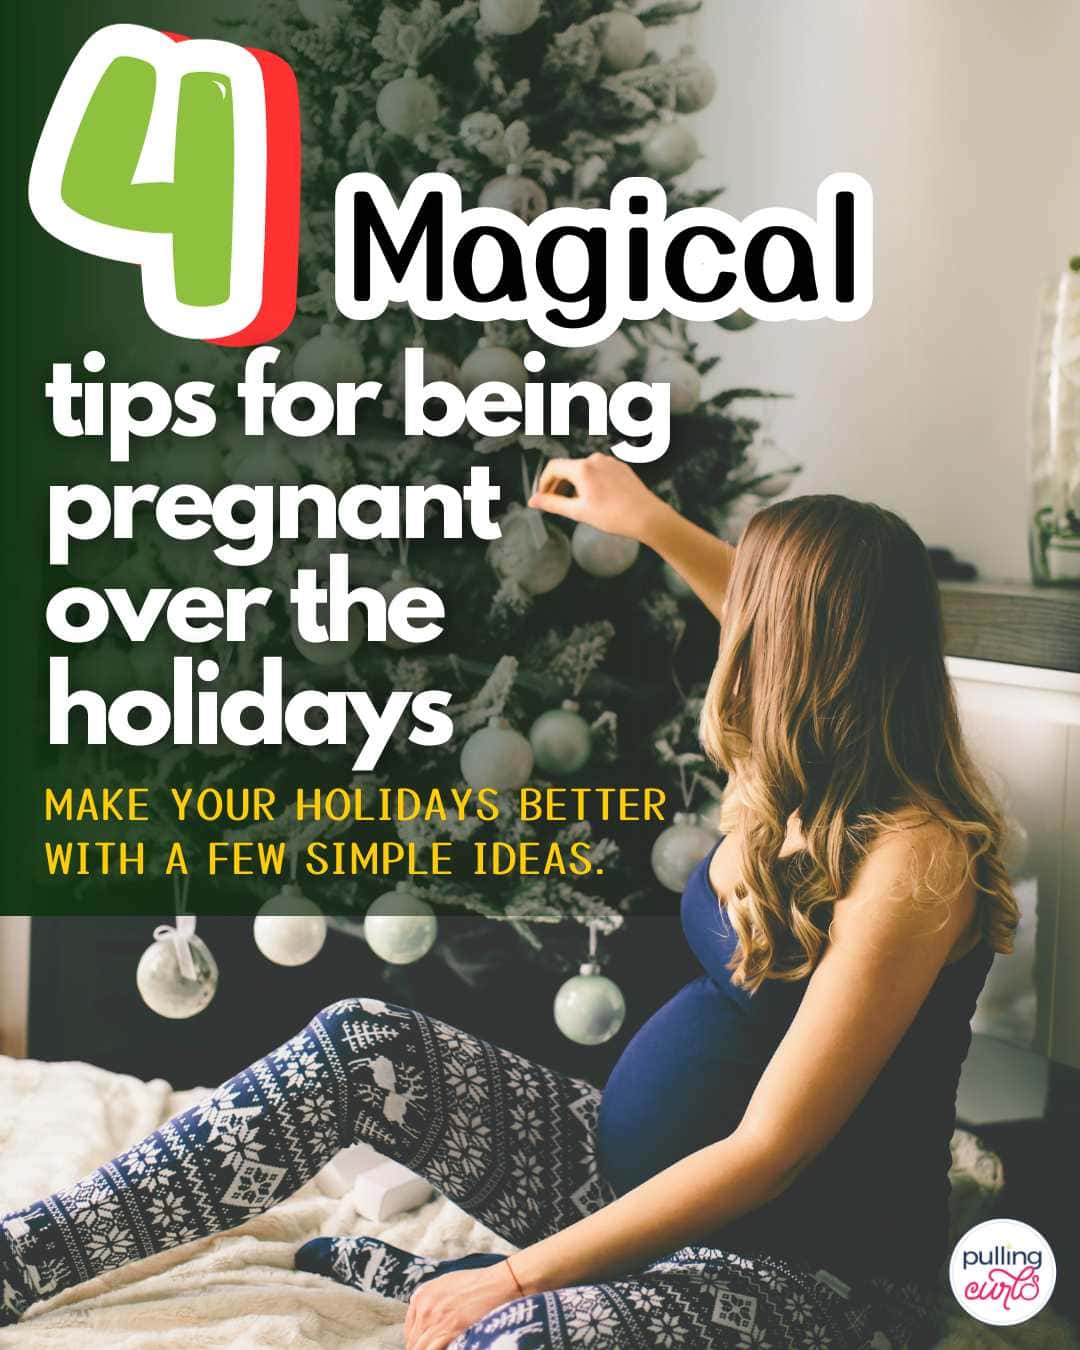 pregnant woamn decorating the tree / 4 magical tips for being pregnant over the holidays. Make your holidays better with a few simple ideas. via @pullingcurls